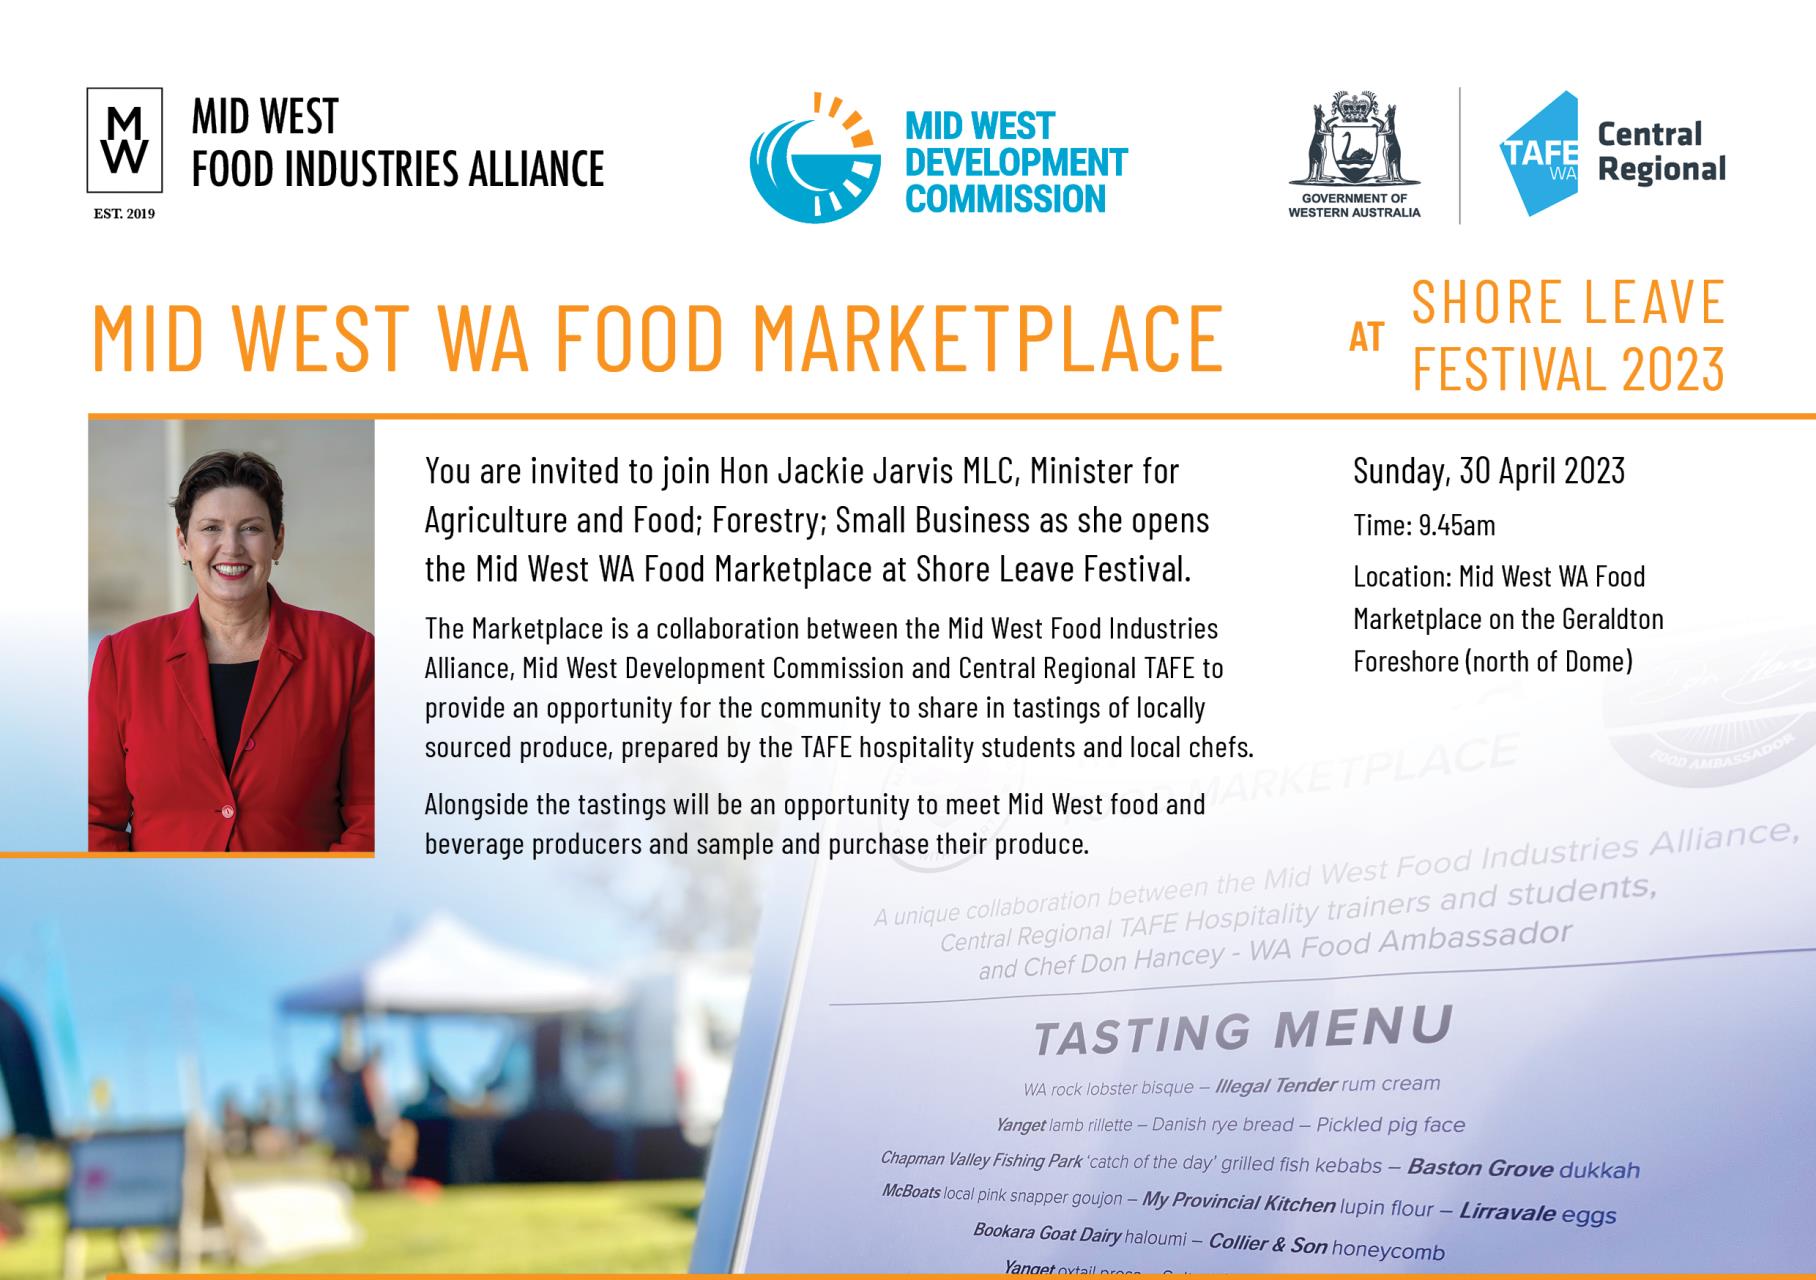 Minister for Agriculture and Food to open the Mid West WA Food